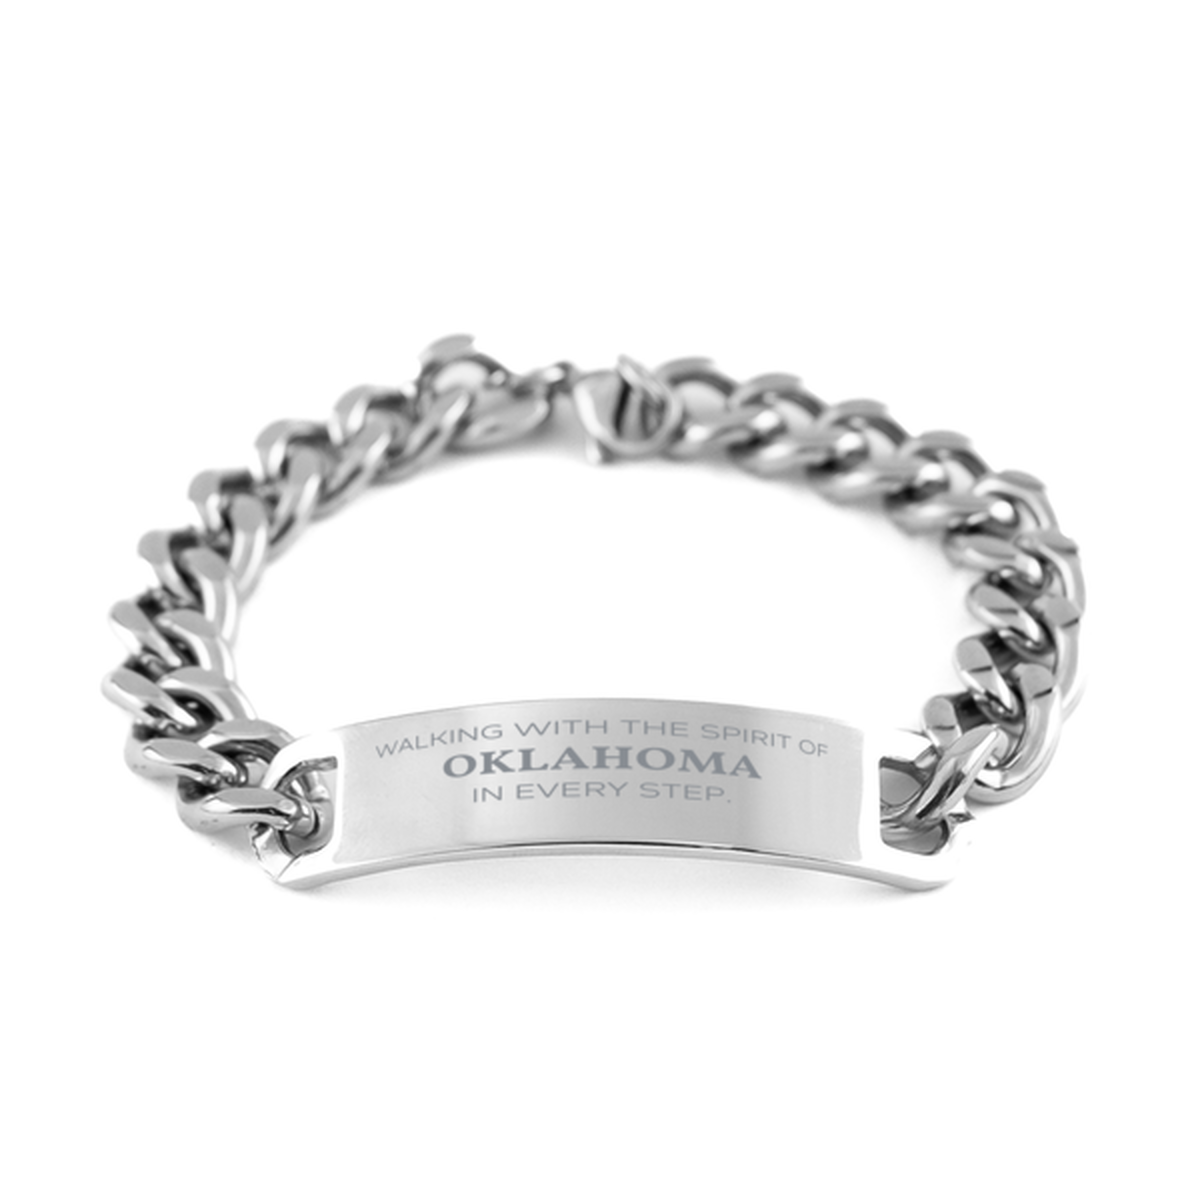 Oklahoma Gifts, Walking with the spirit, Love Oklahoma Birthday Christmas Cuban Chain Stainless Steel Bracelet For Oklahoma People, Men, Women, Friends